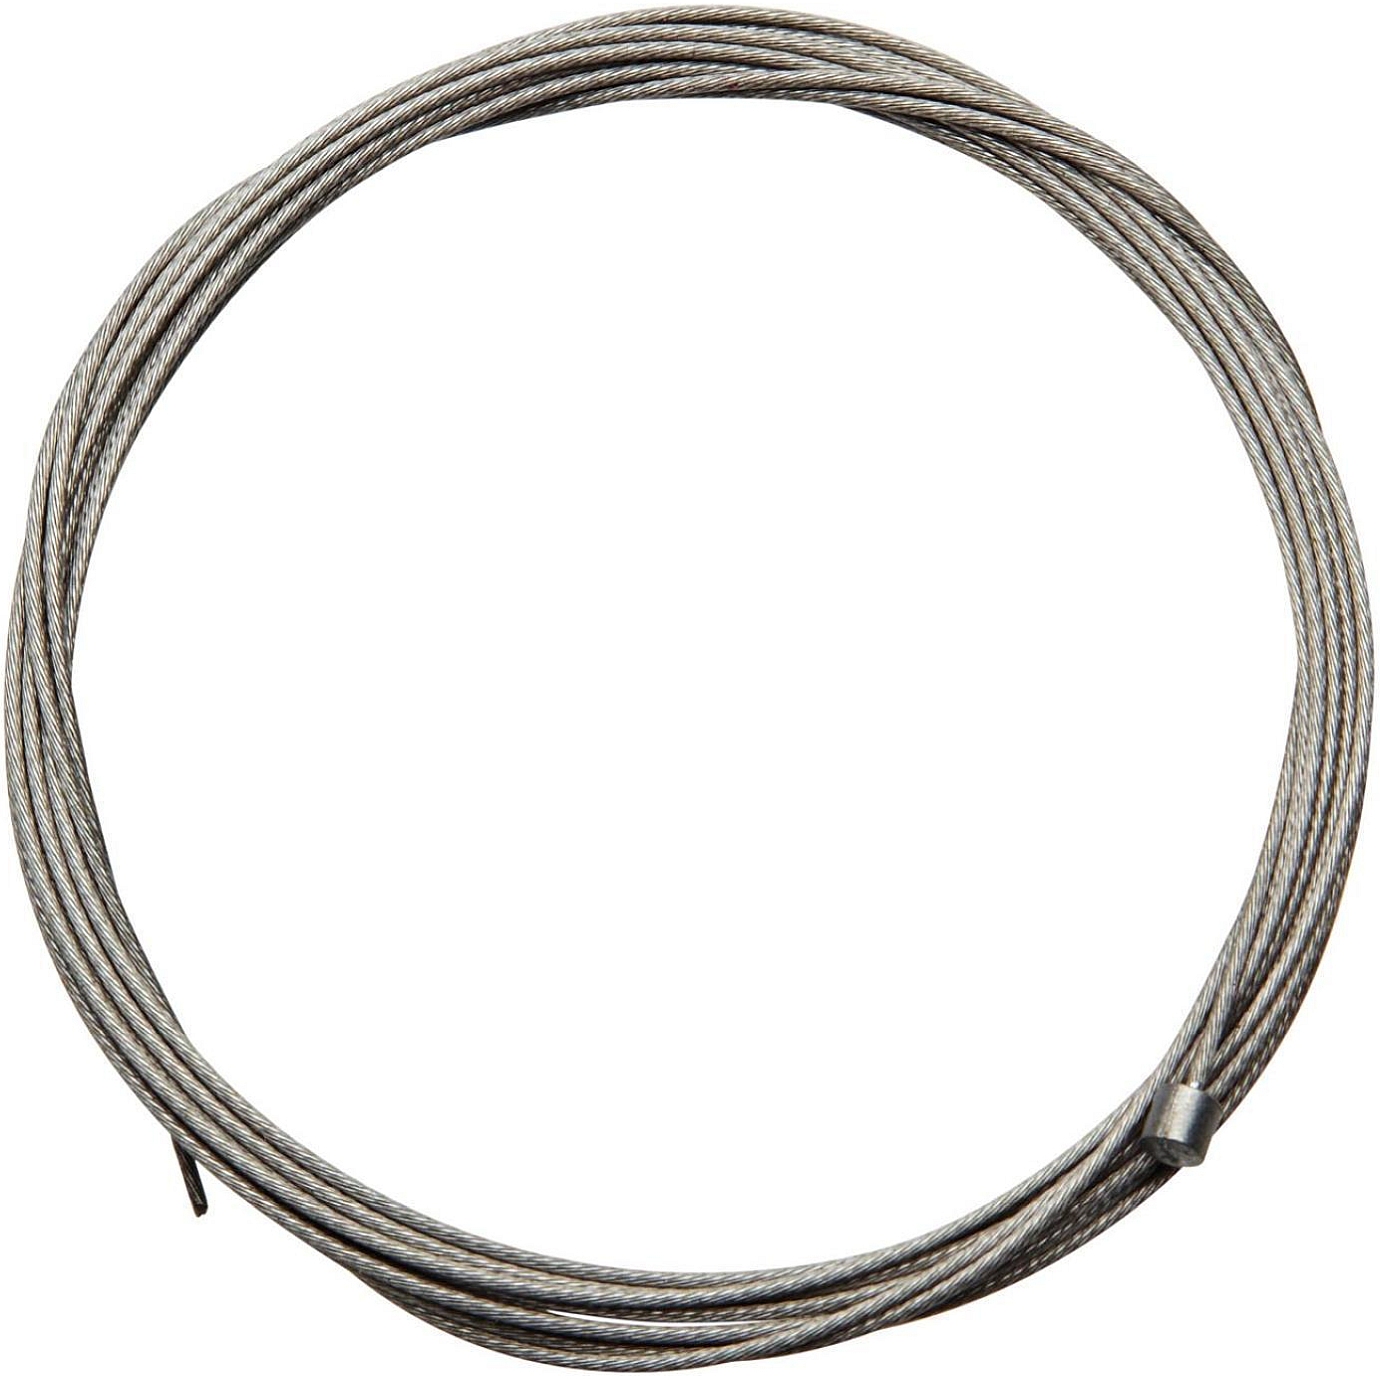 Image of SRAM MTB Stainless Braking Cable V2 1750mm - 1 Piece